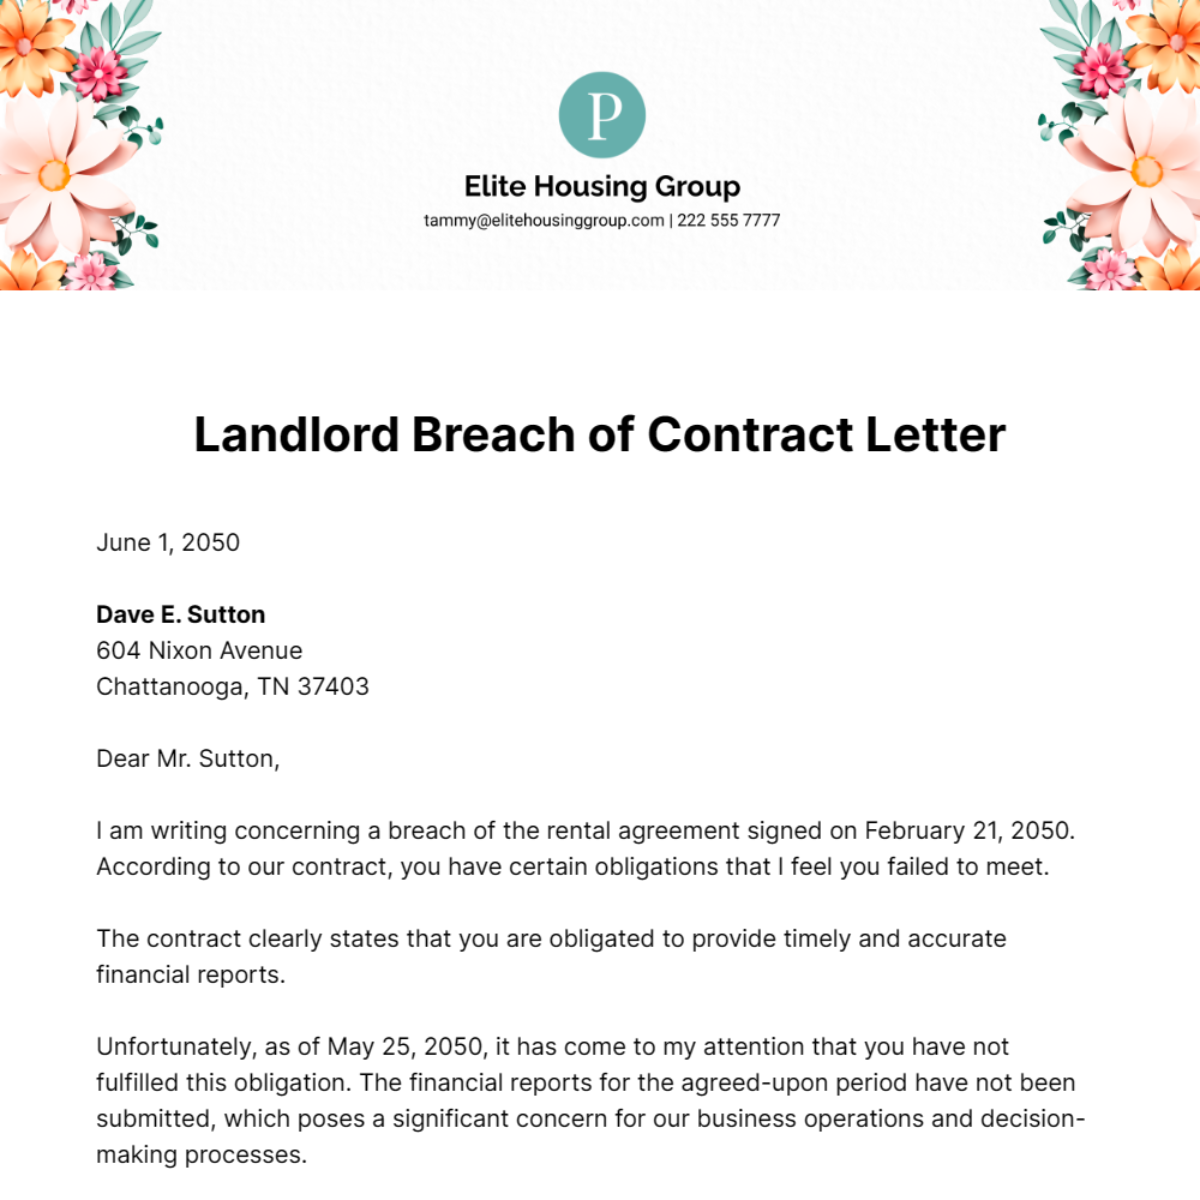 Landlord Breach of Contract Letter Template